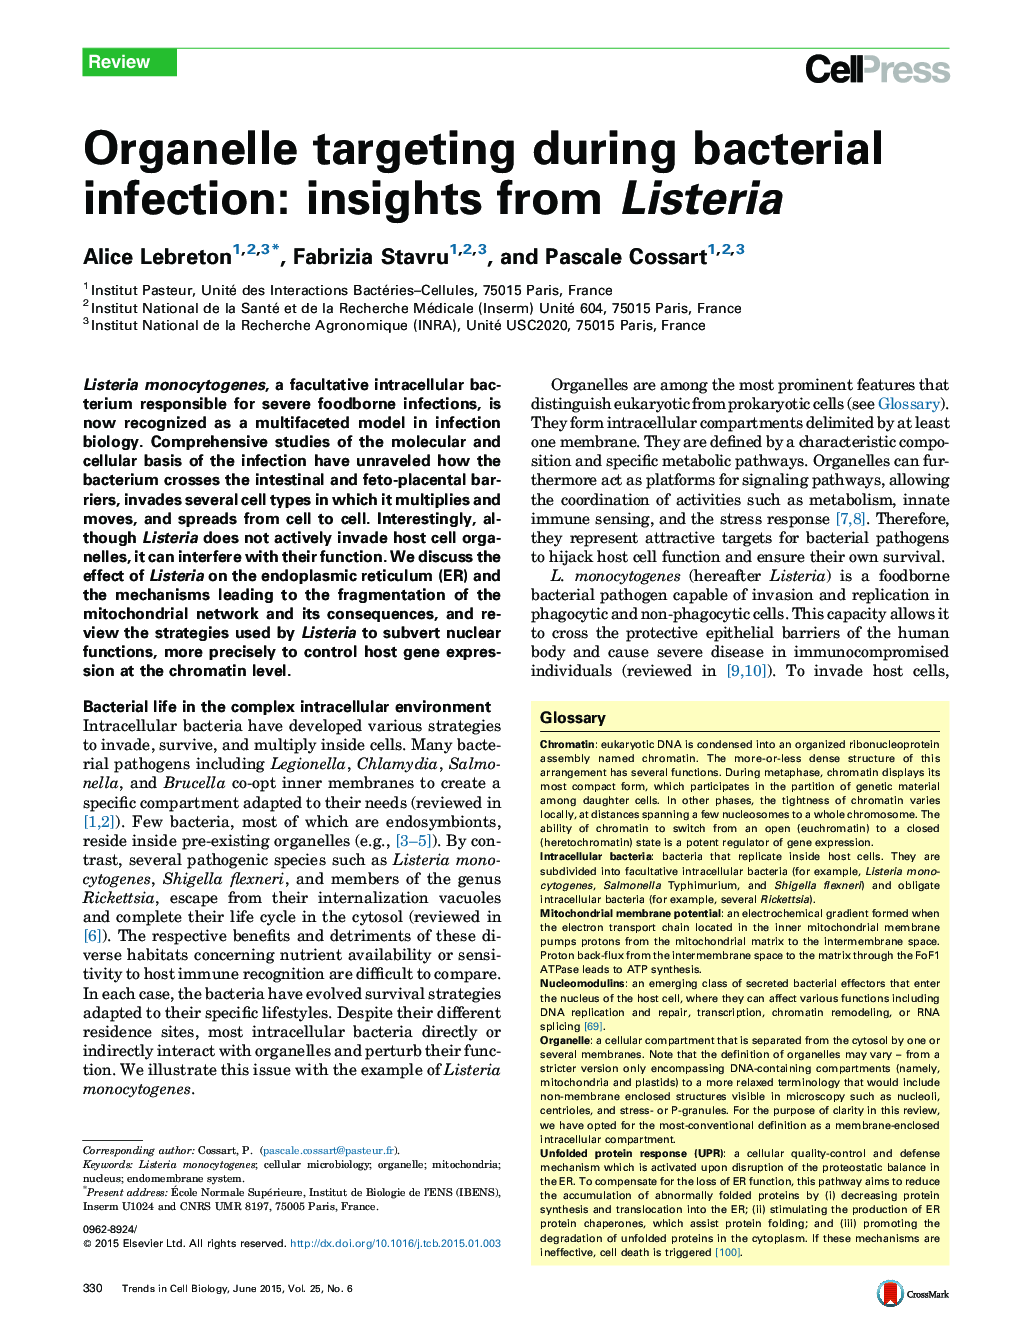 Organelle targeting during bacterial infection: insights from Listeria